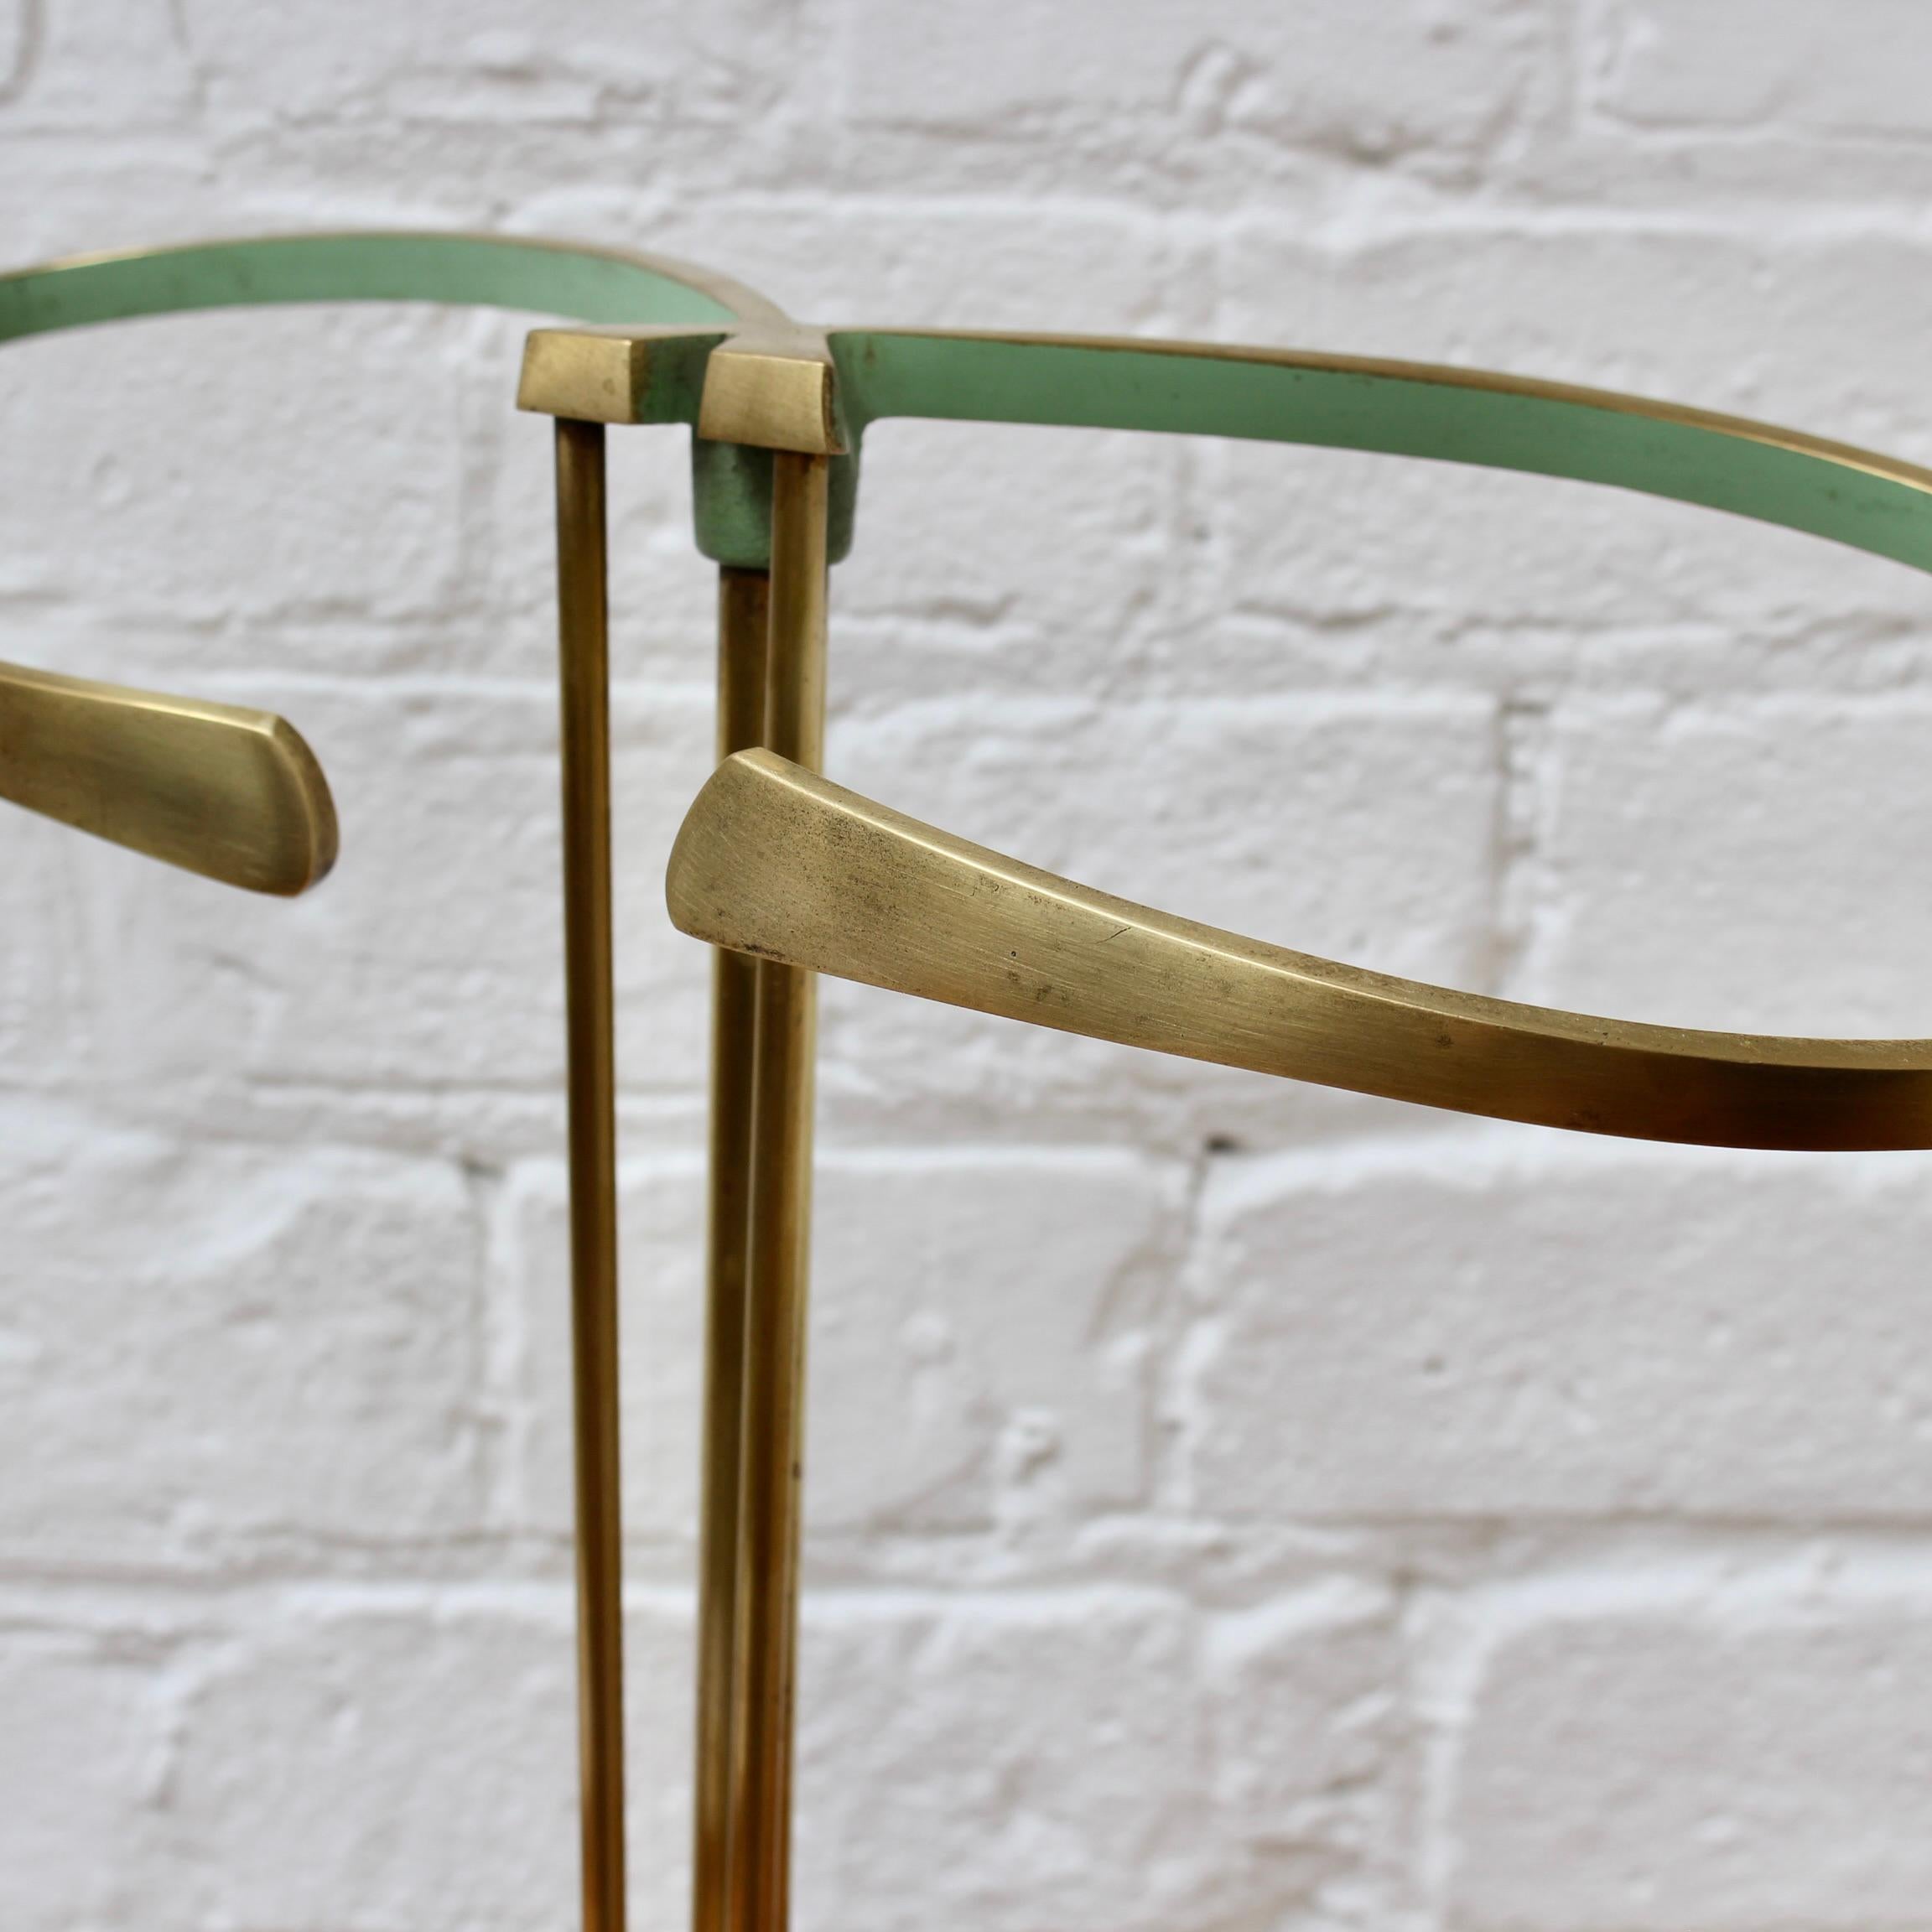 Midcentury Modern Brass Umbrella Stand Attributed to Artes H&H Seefried Steppach For Sale 3